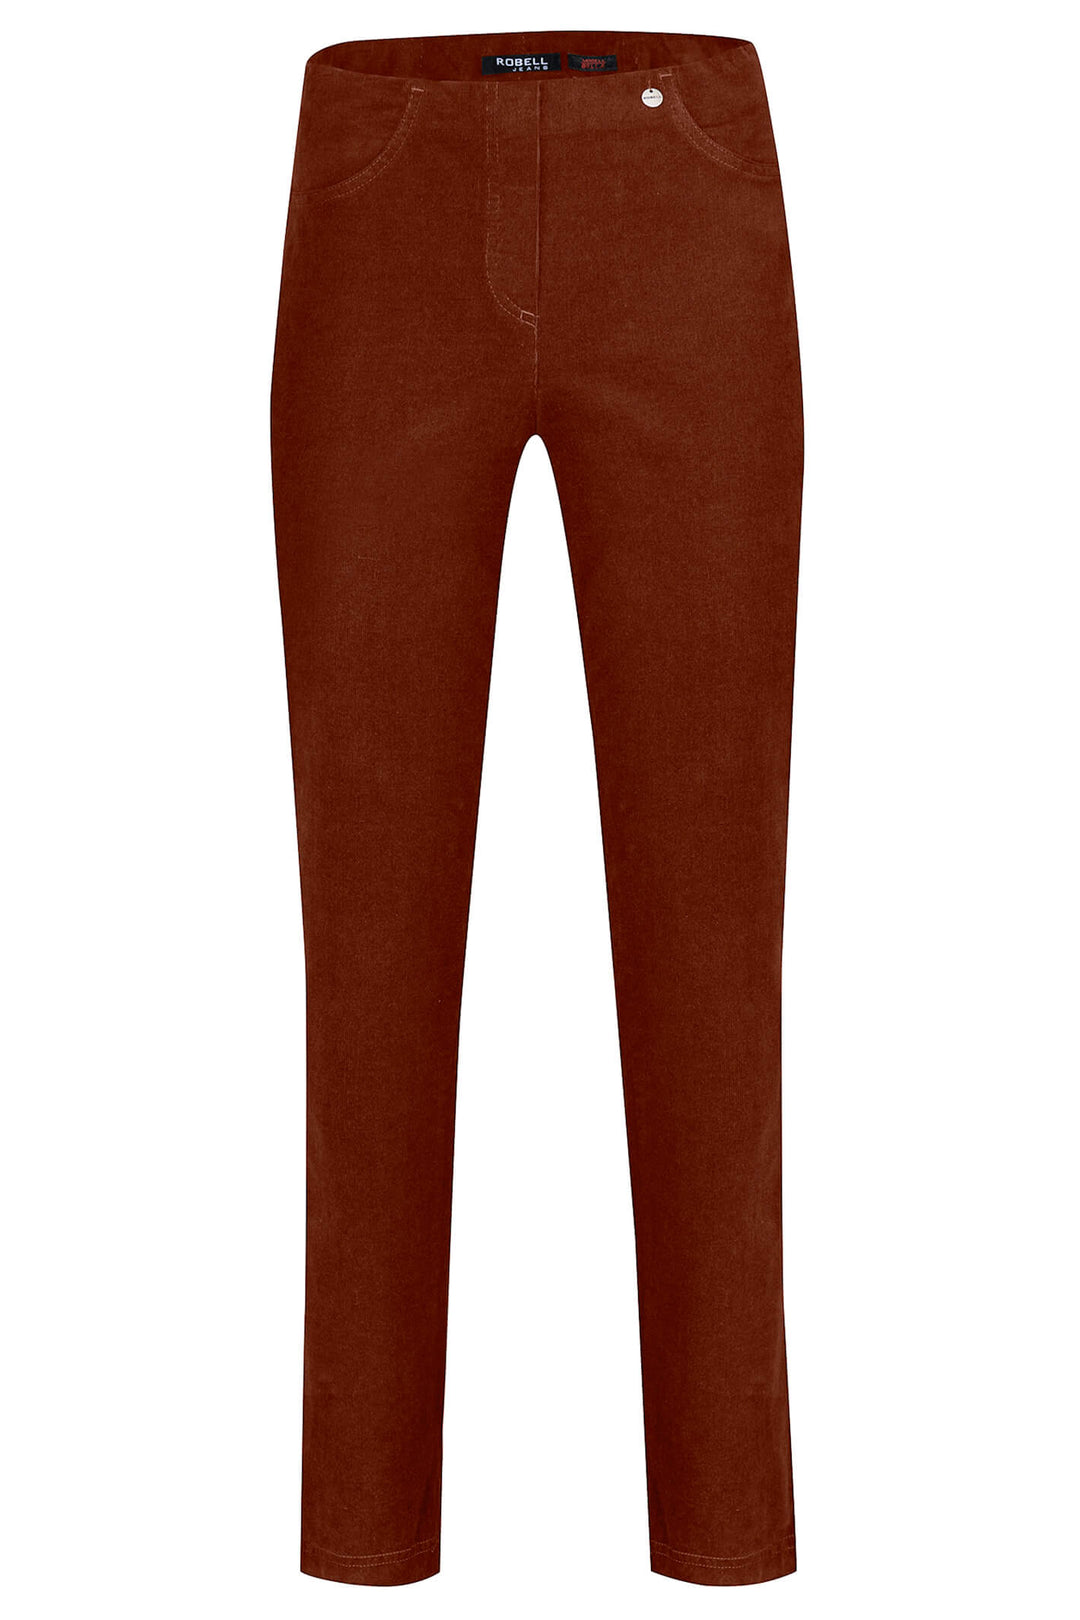 Robell 52457 290 Chestnut Brown Bella Needlechord Trousers - Experience Boutique